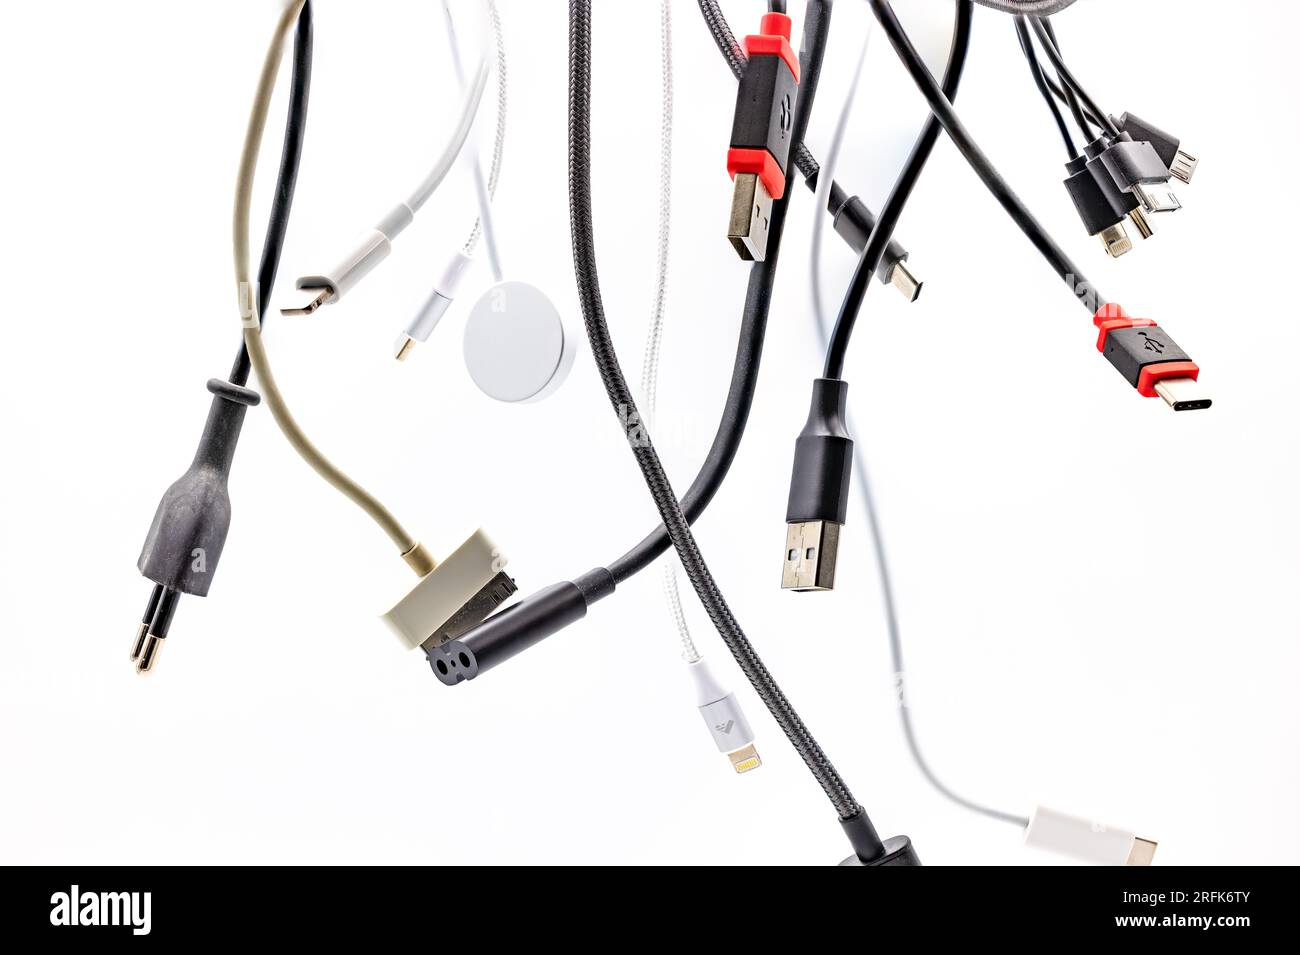 Chaos and confusion with plugs, sockets and USB cables isolated against a white background with focus stacking Stock Photo